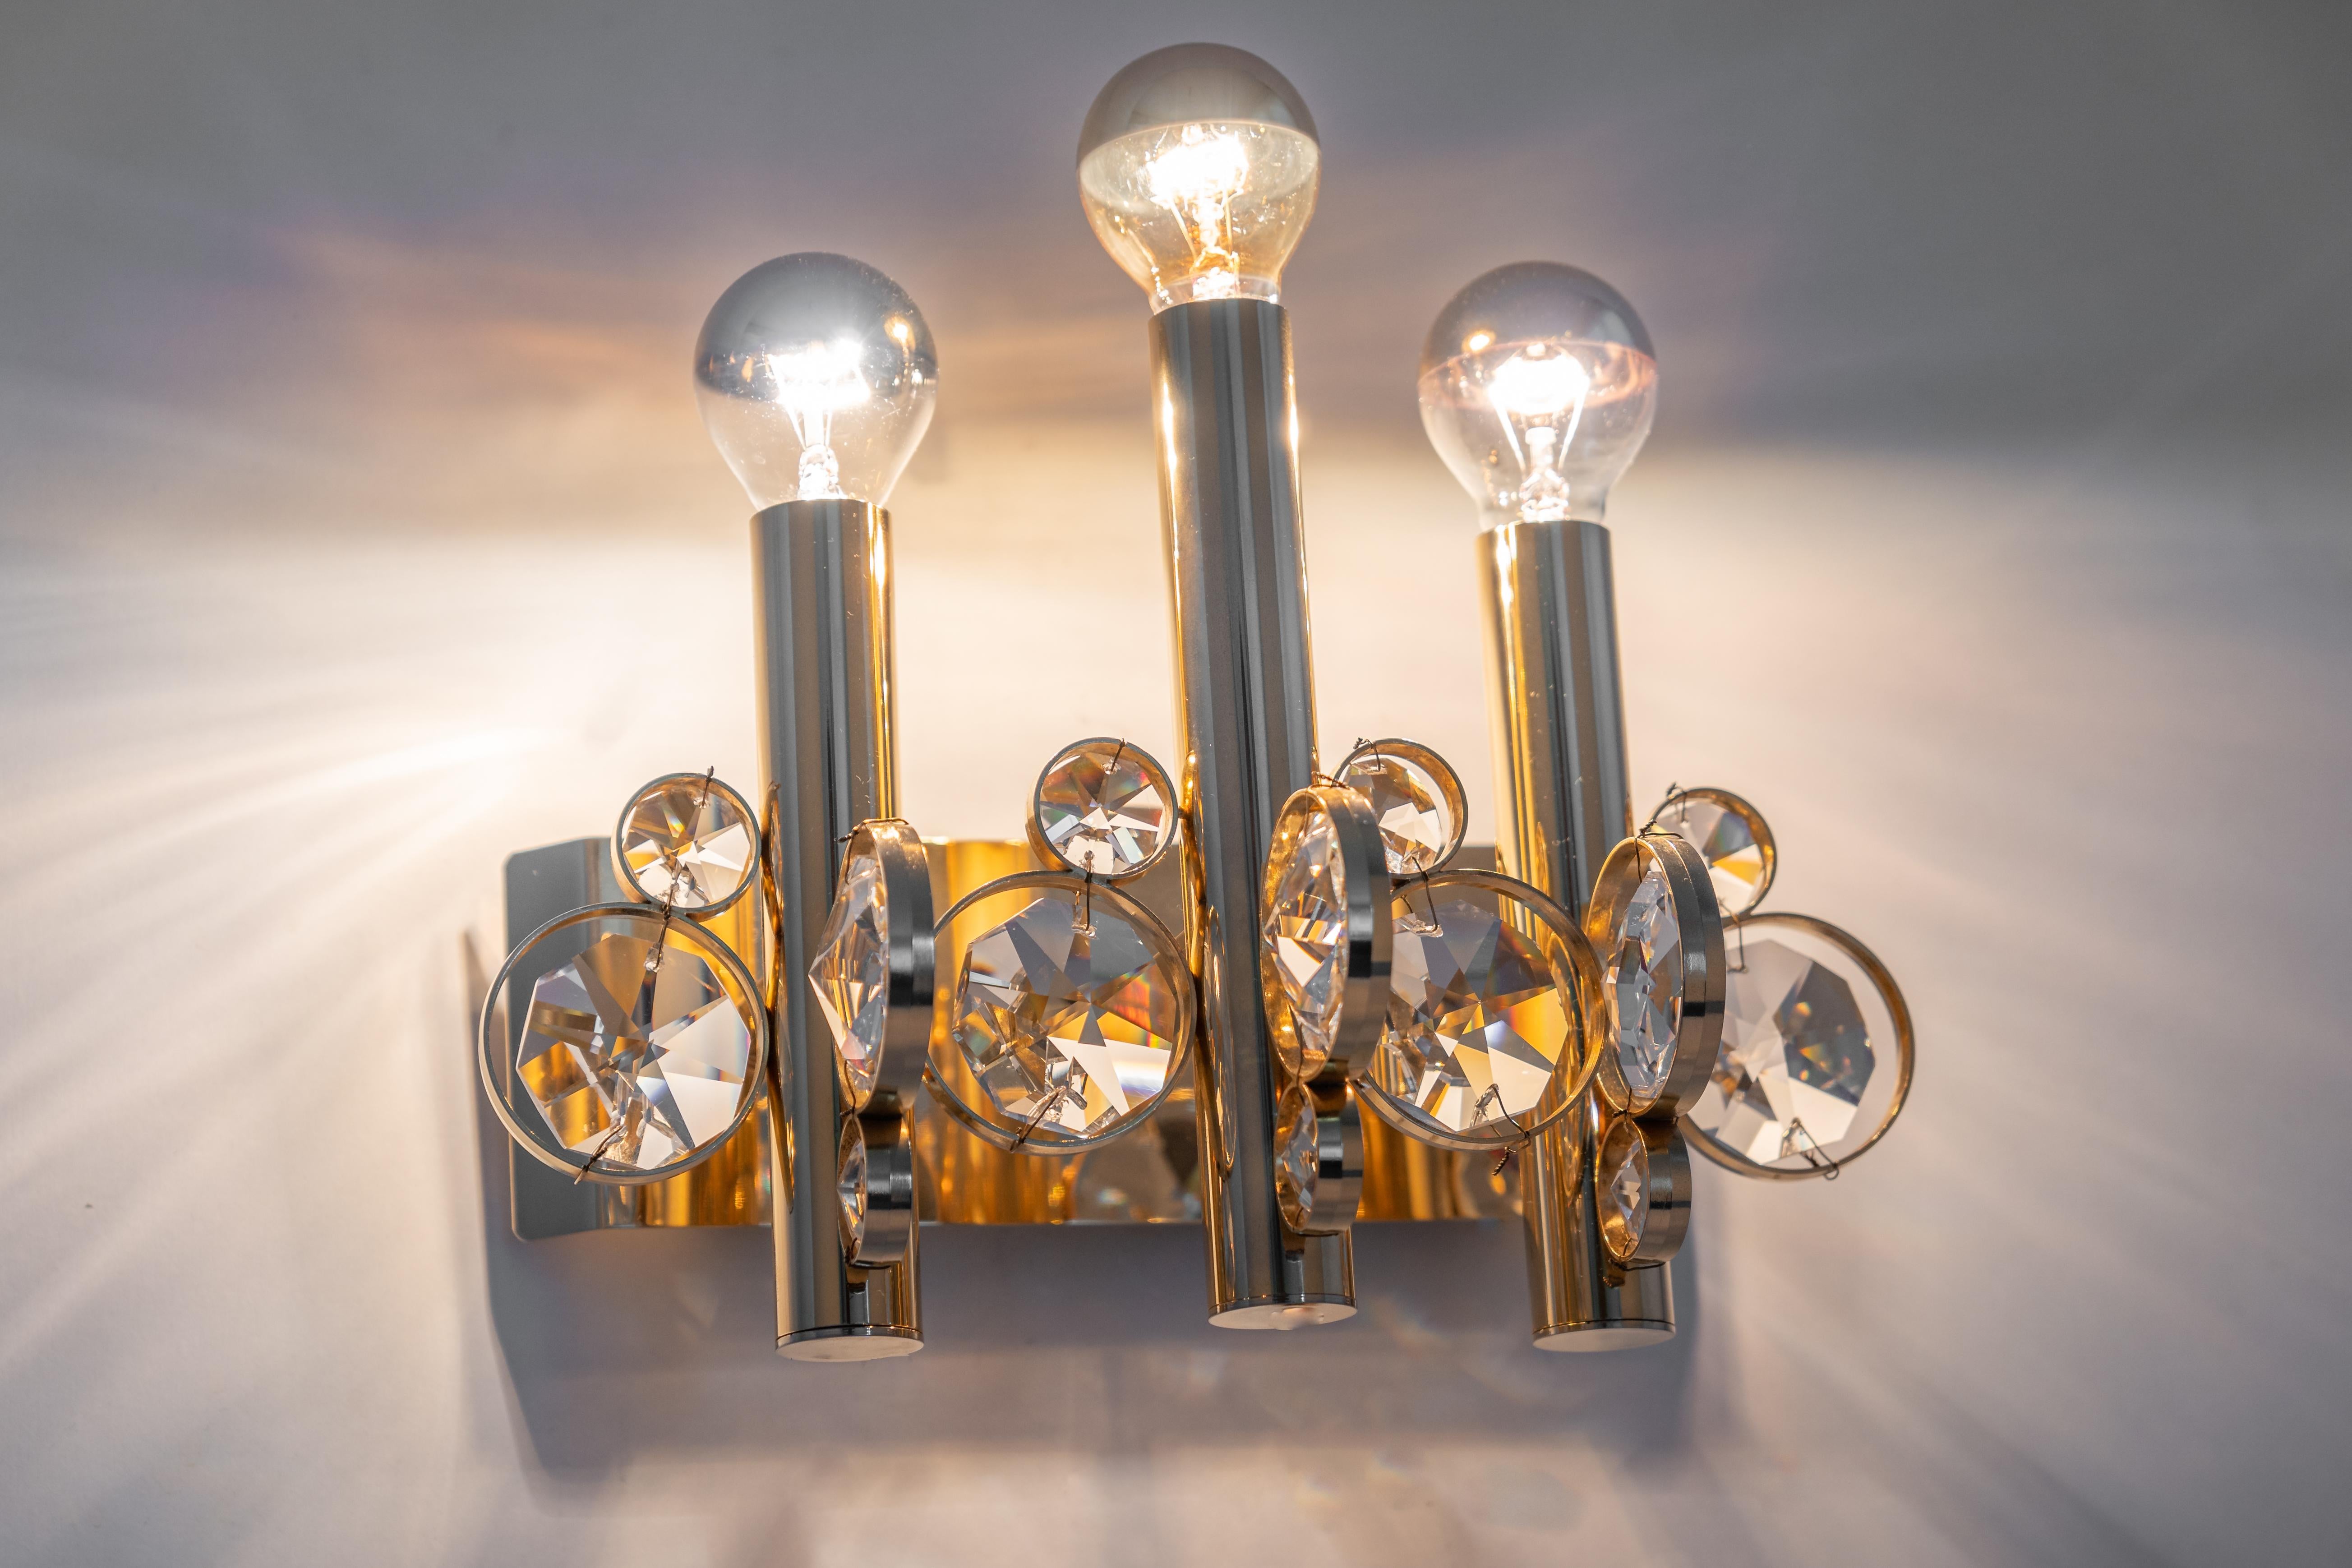 Pair of Gilded Brass Crystal Wall Lights, Sciolari Design, Palwa, Germany, 1960s For Sale 2